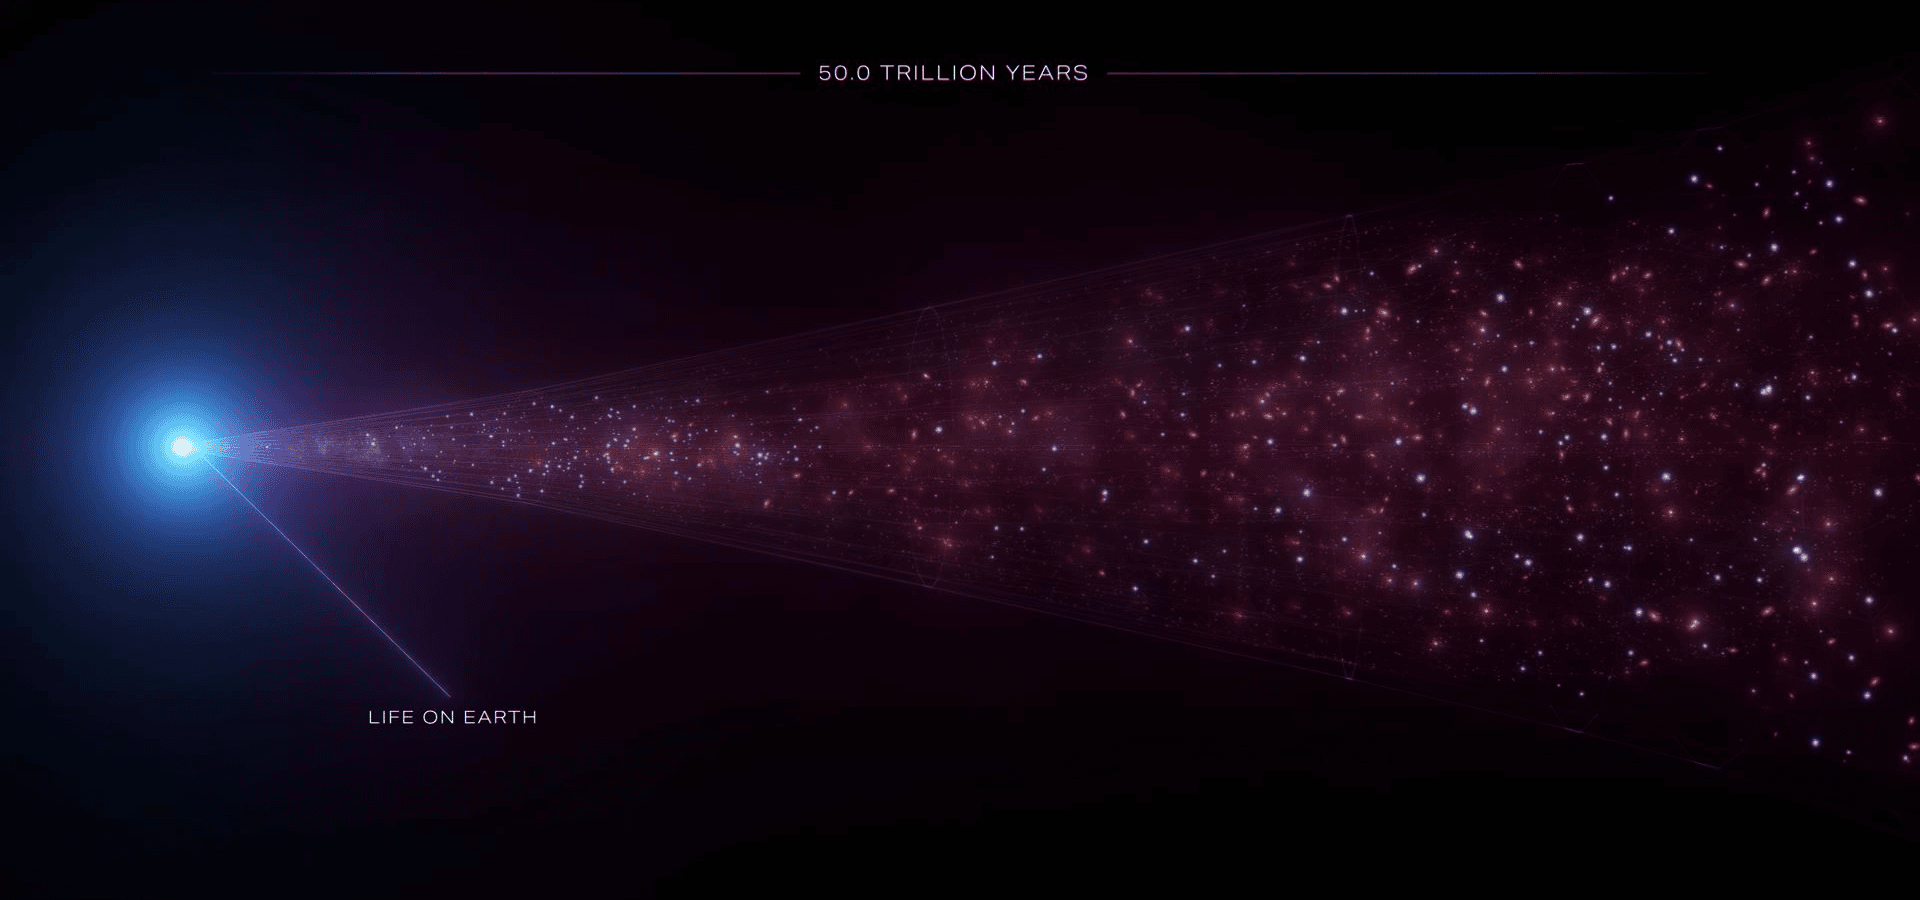 A visualization of the future of the Universe